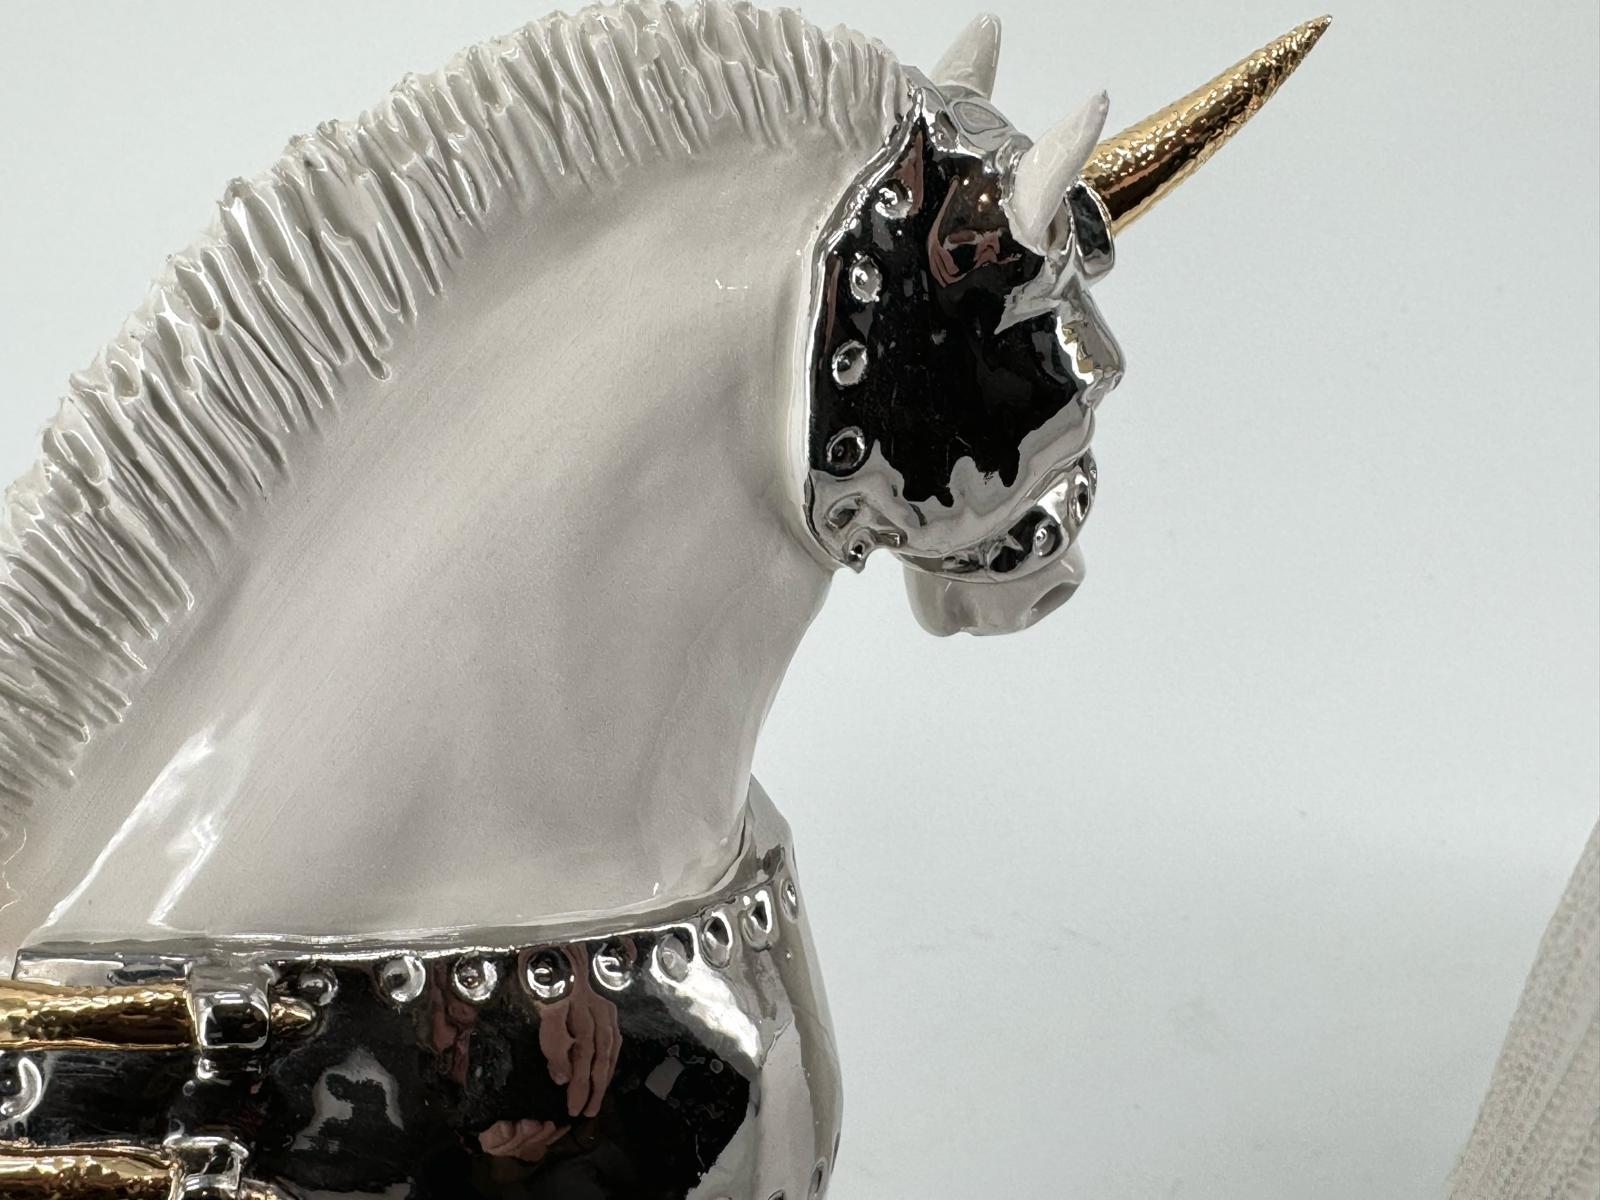 Hand-Crafted 2 Horses, Silver Ceramic Centerpiece, Completely Handmade Without Mold, NEW 2023 For Sale